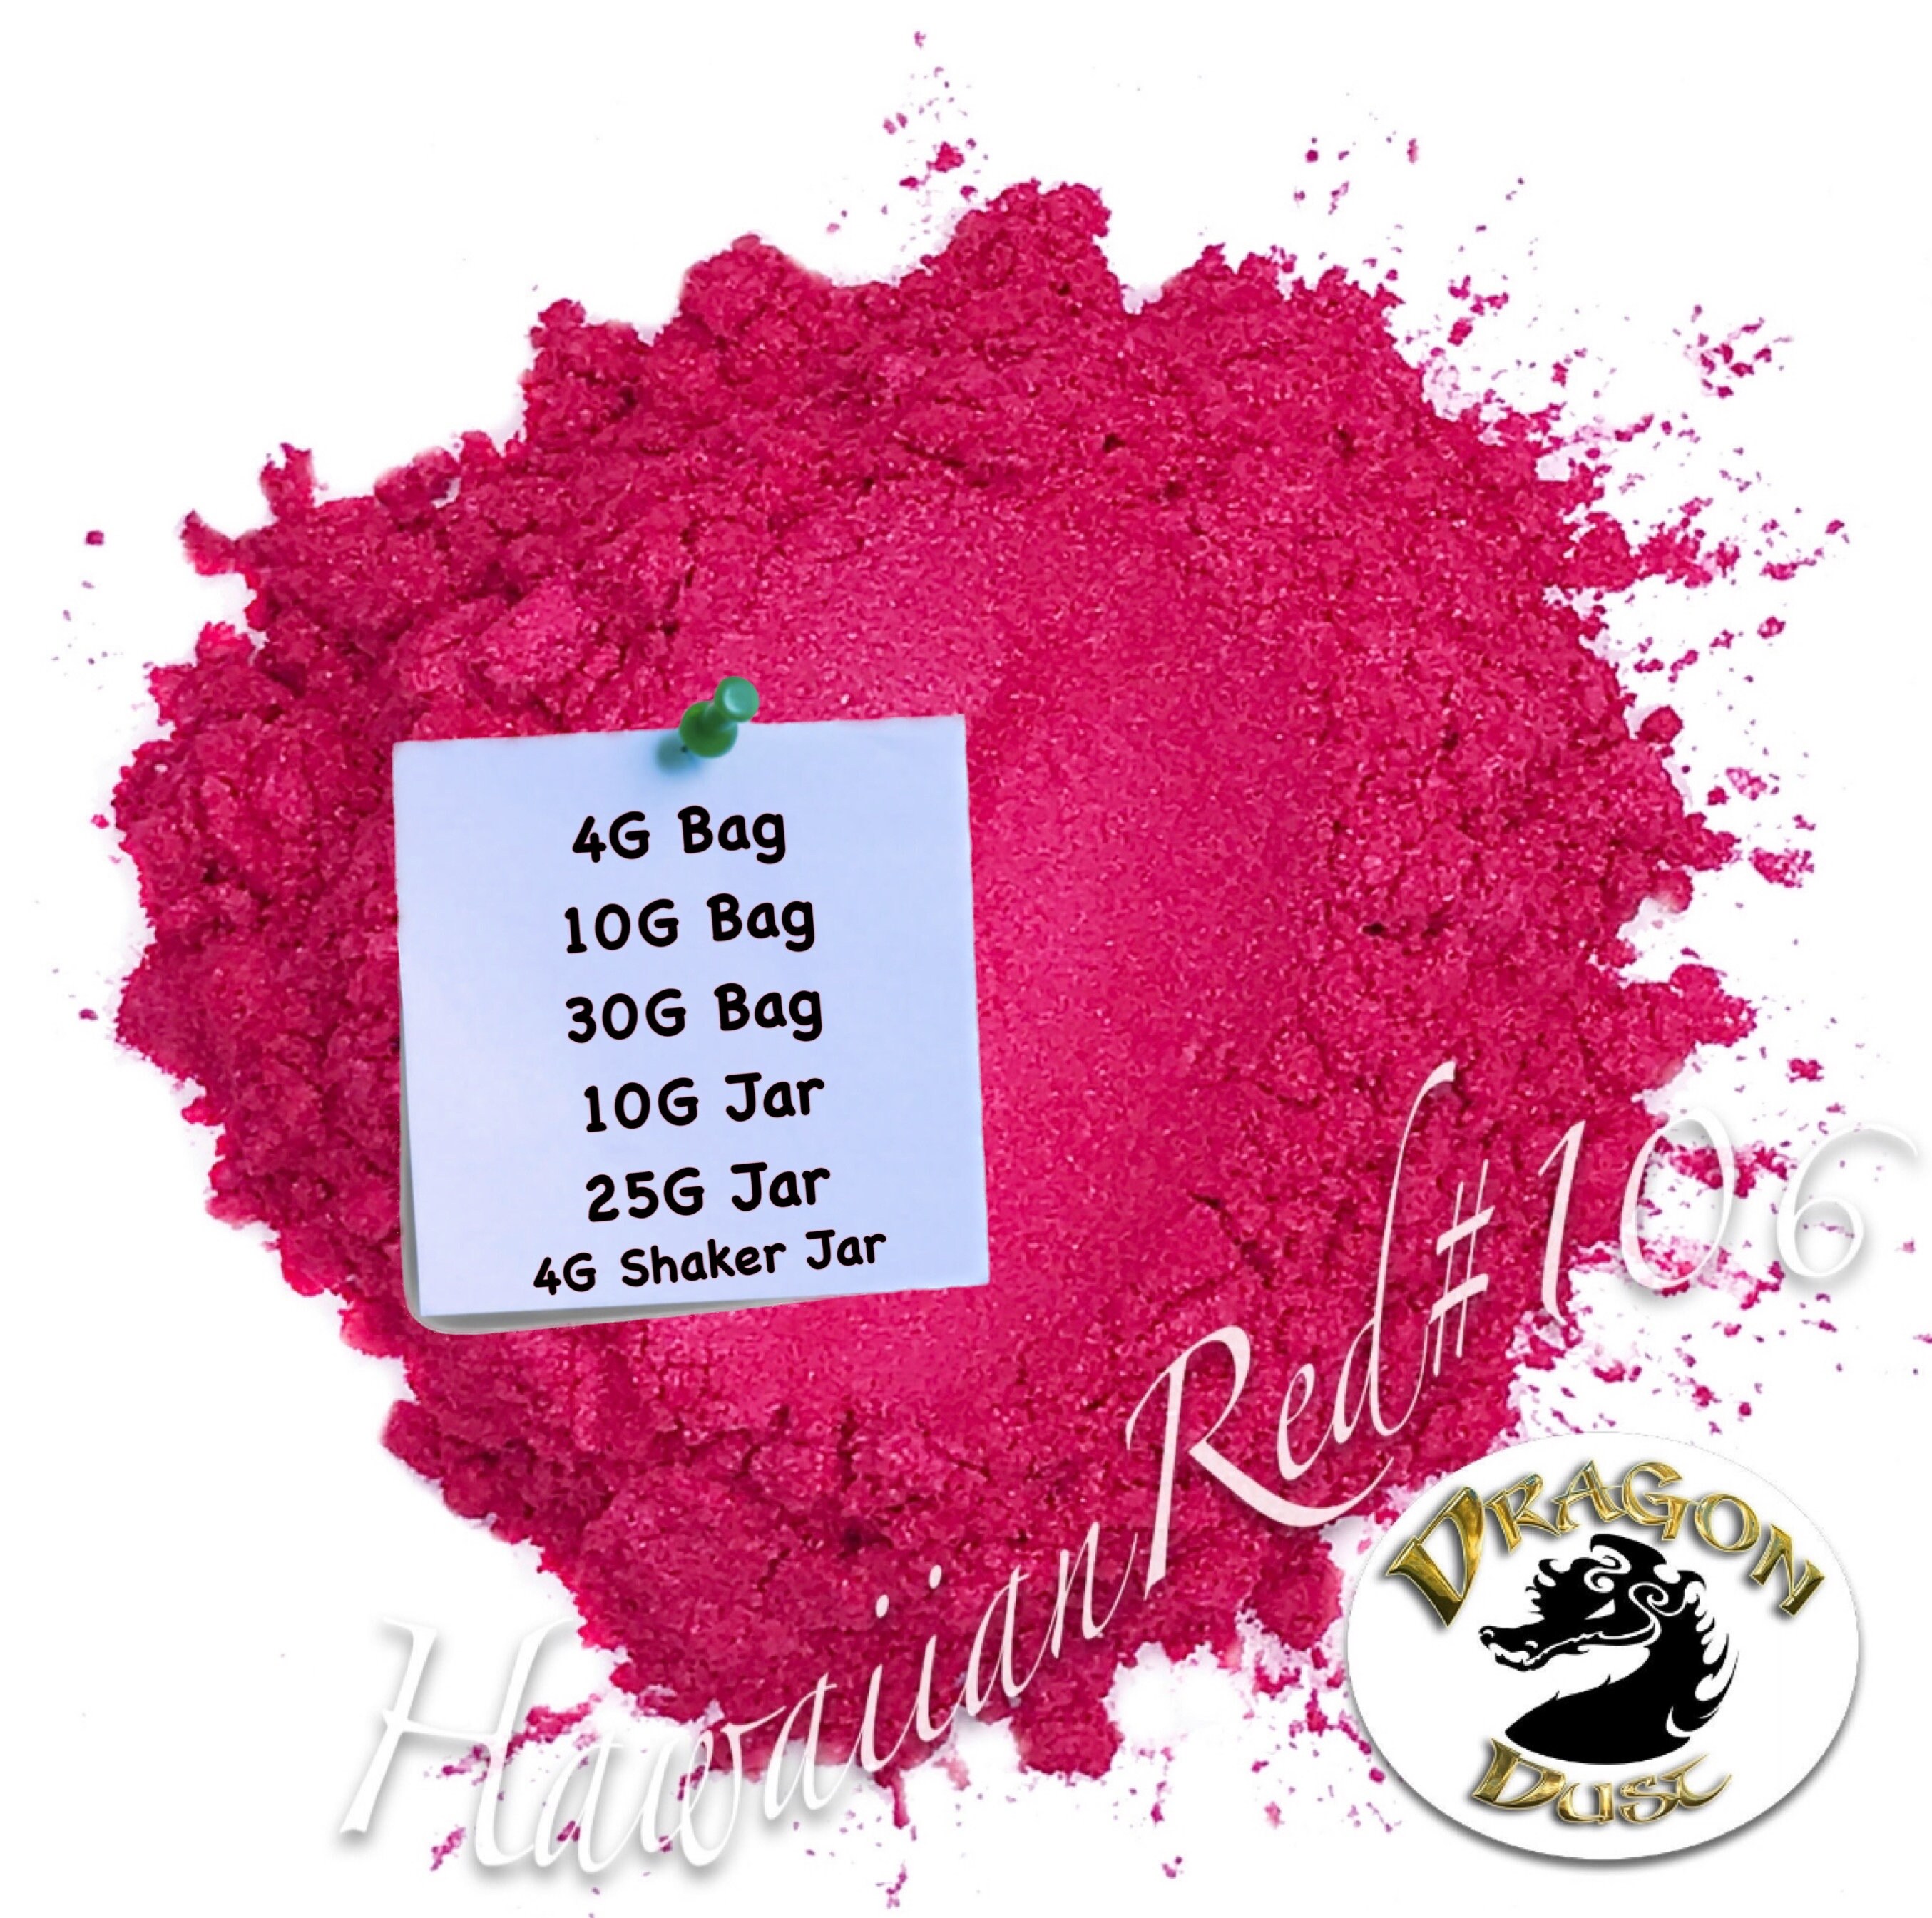 Gold Mica Powder Pigments for Nail Polish, Slime,resin Jewelry